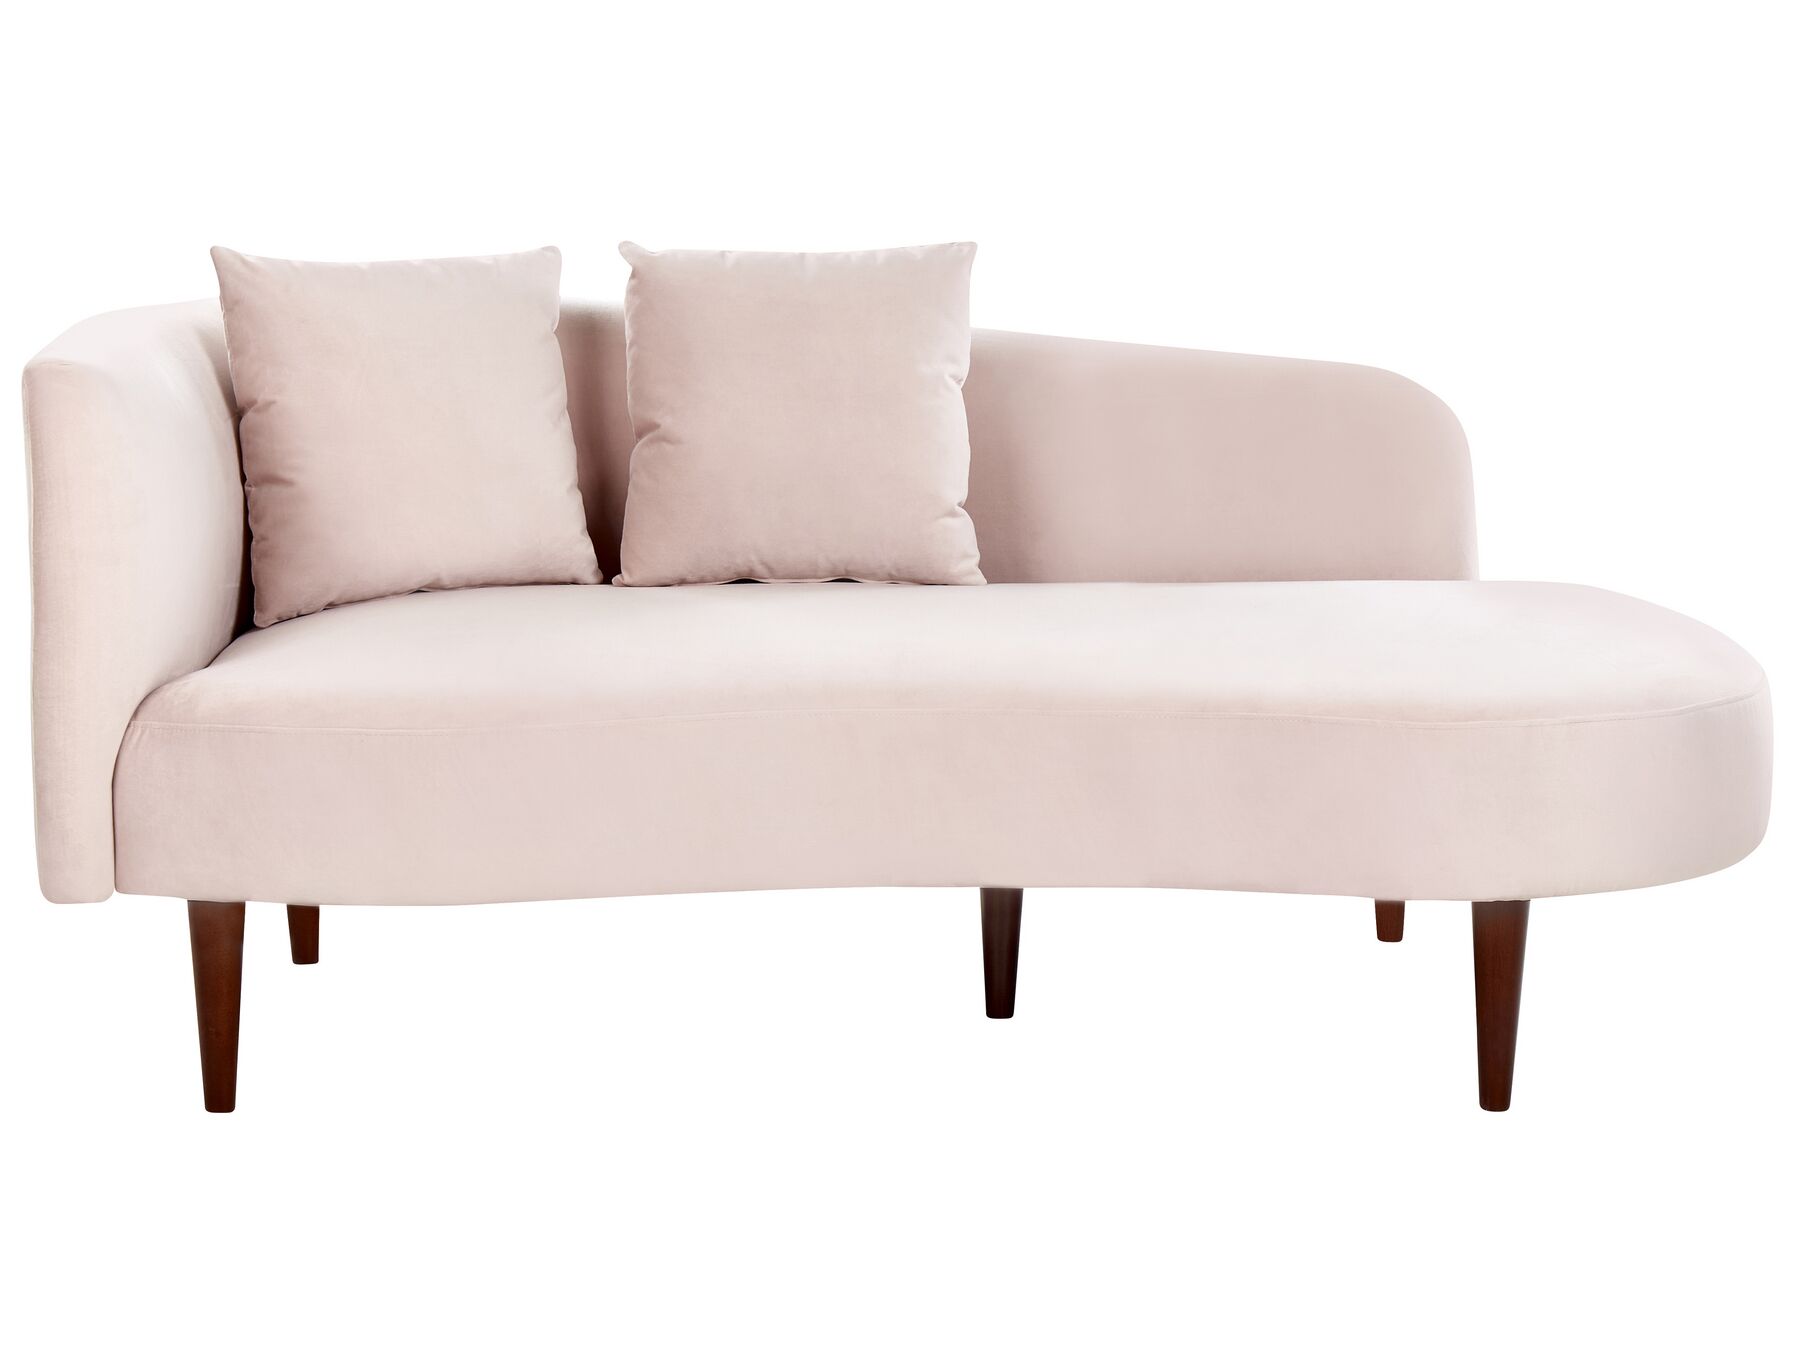 Chaise longue velluto rosa sinistra CHAUMONT_871171